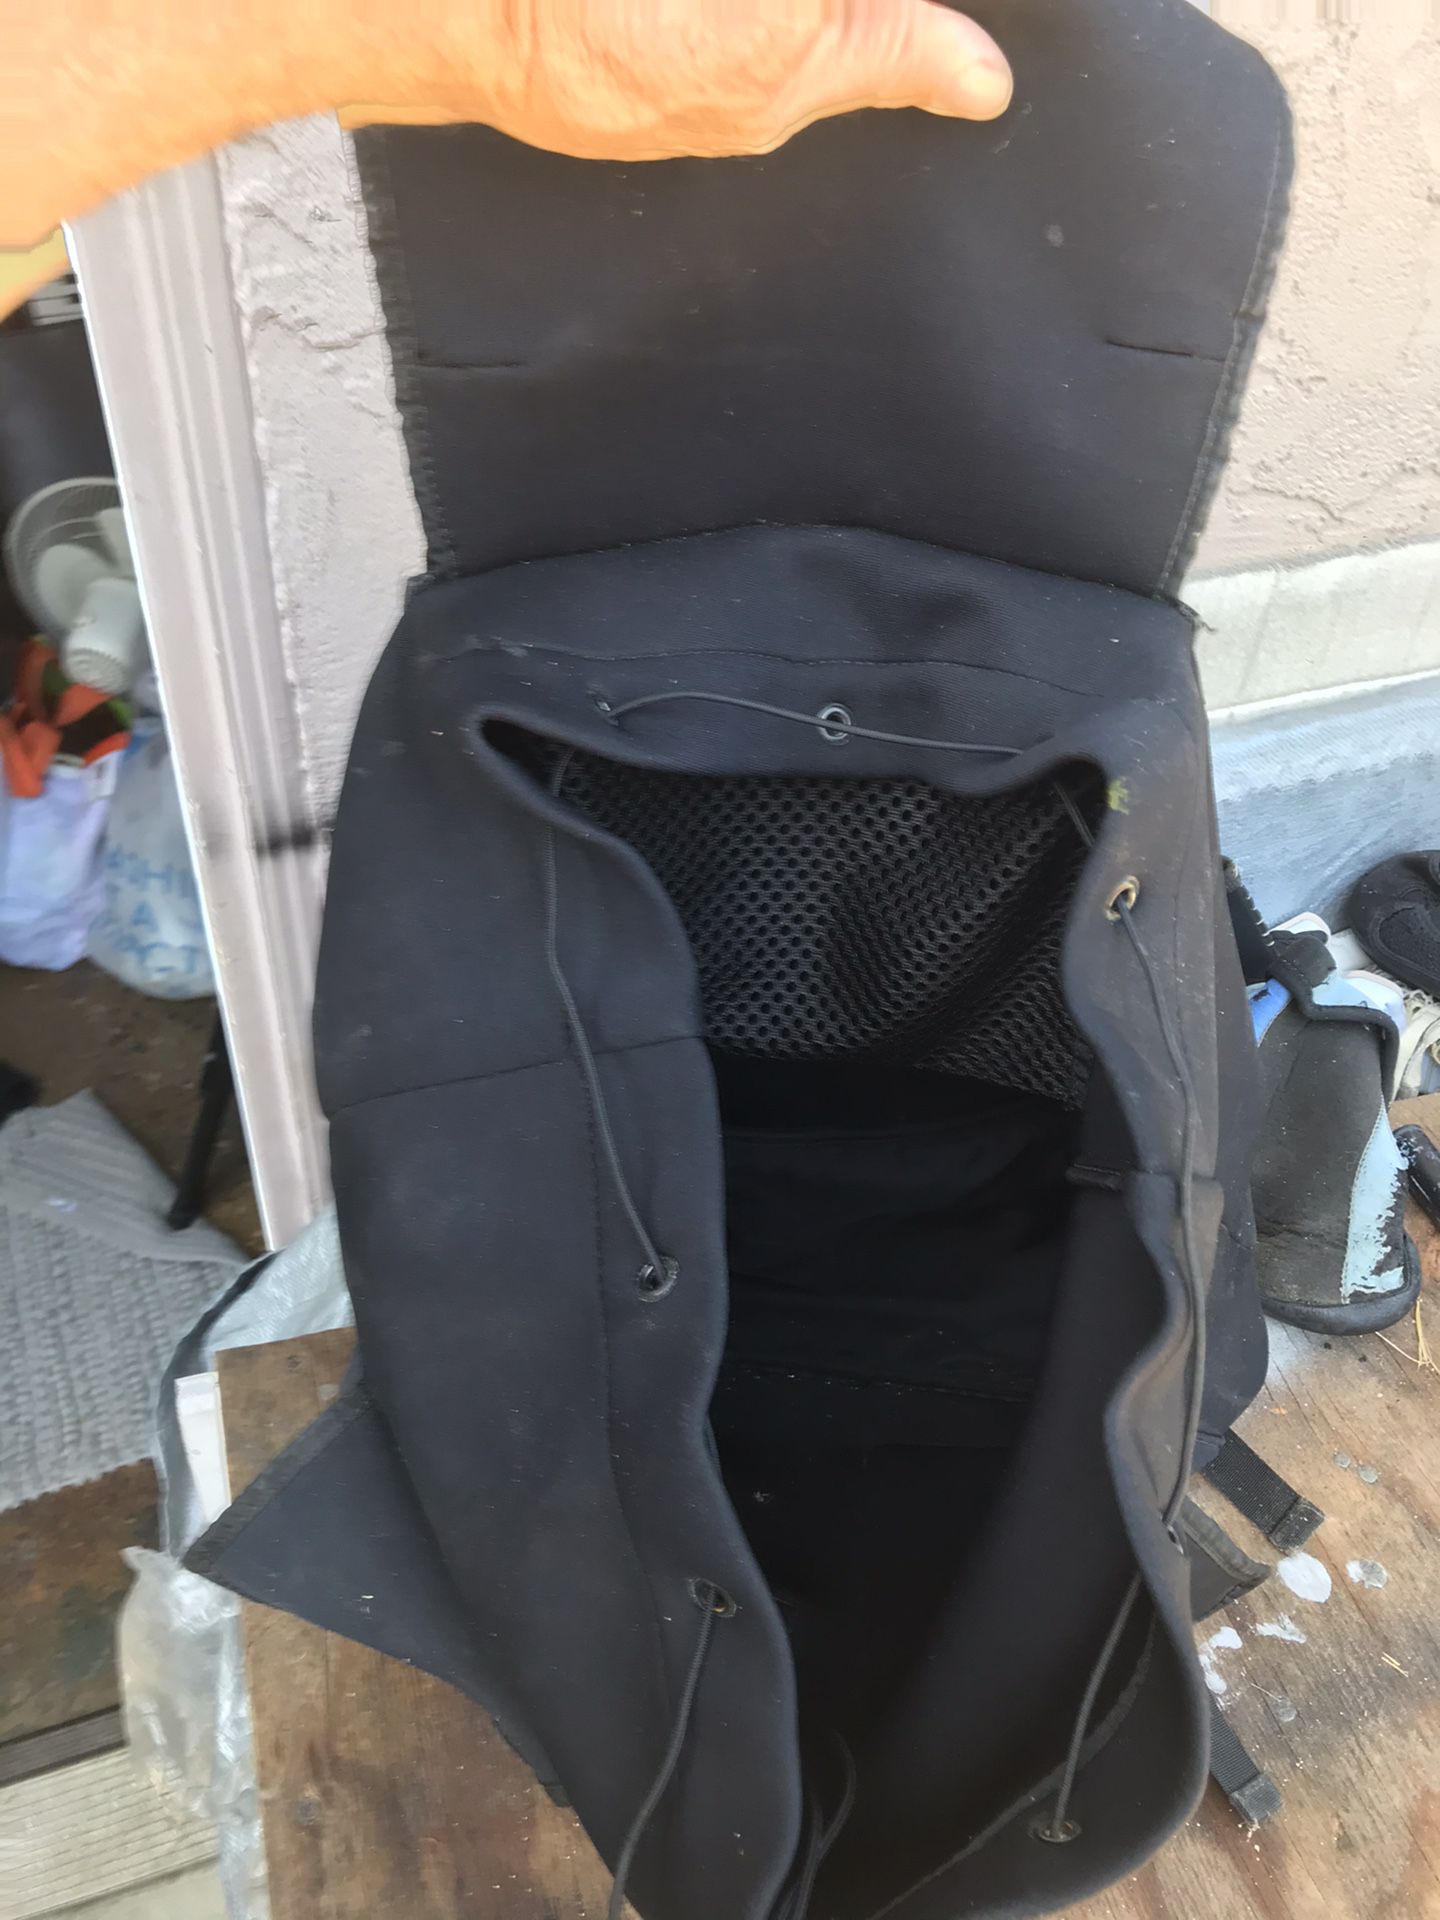 Wetsuit backpack $10